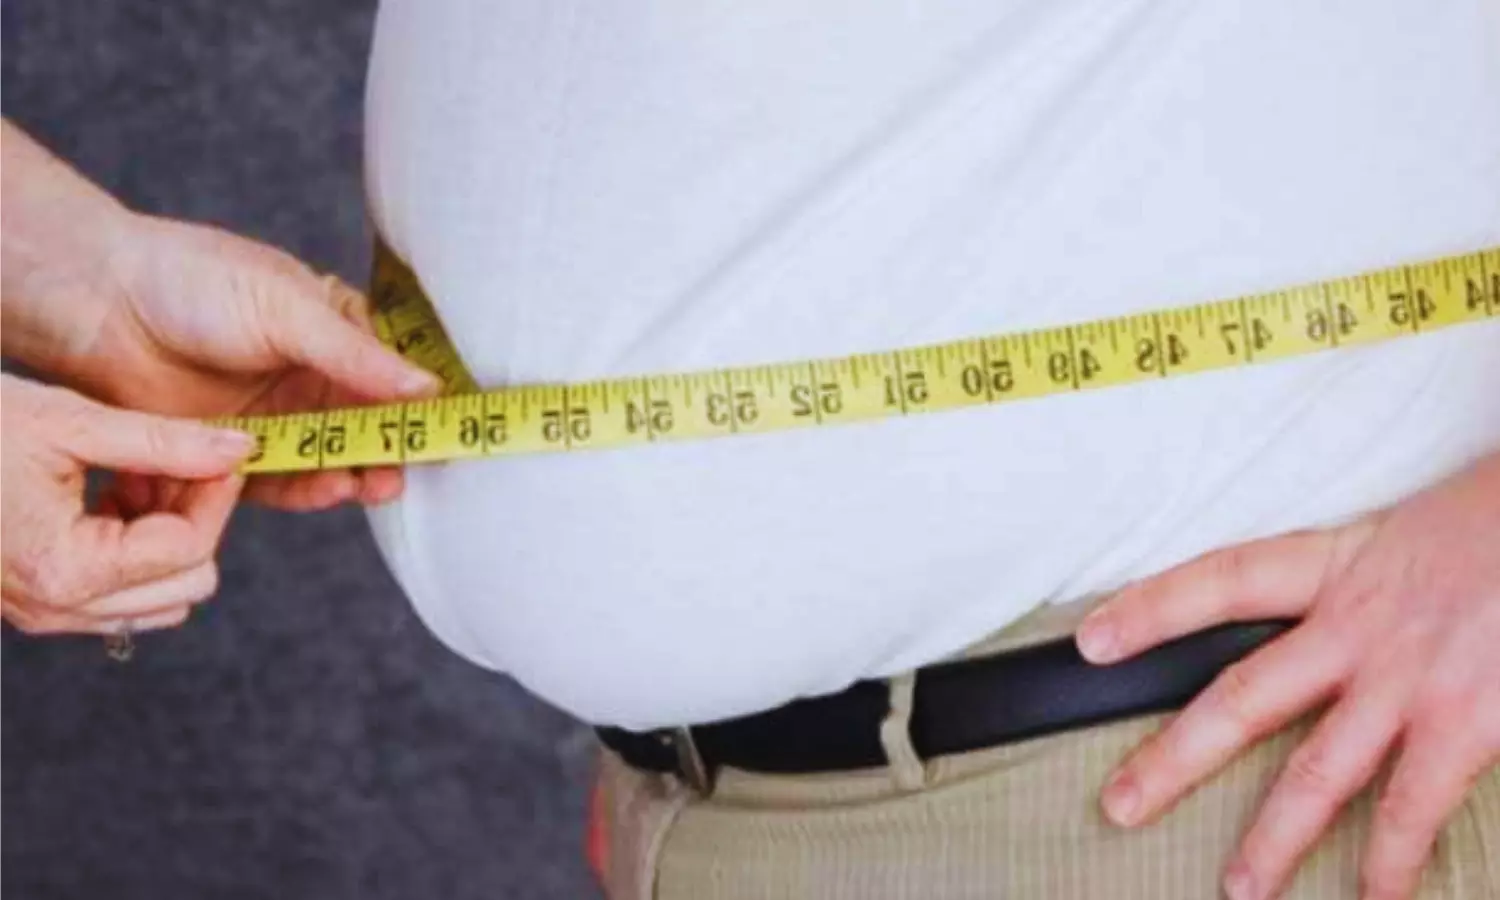 Obesity causes cancer and is major determinant of disability and death, warns new WHO report